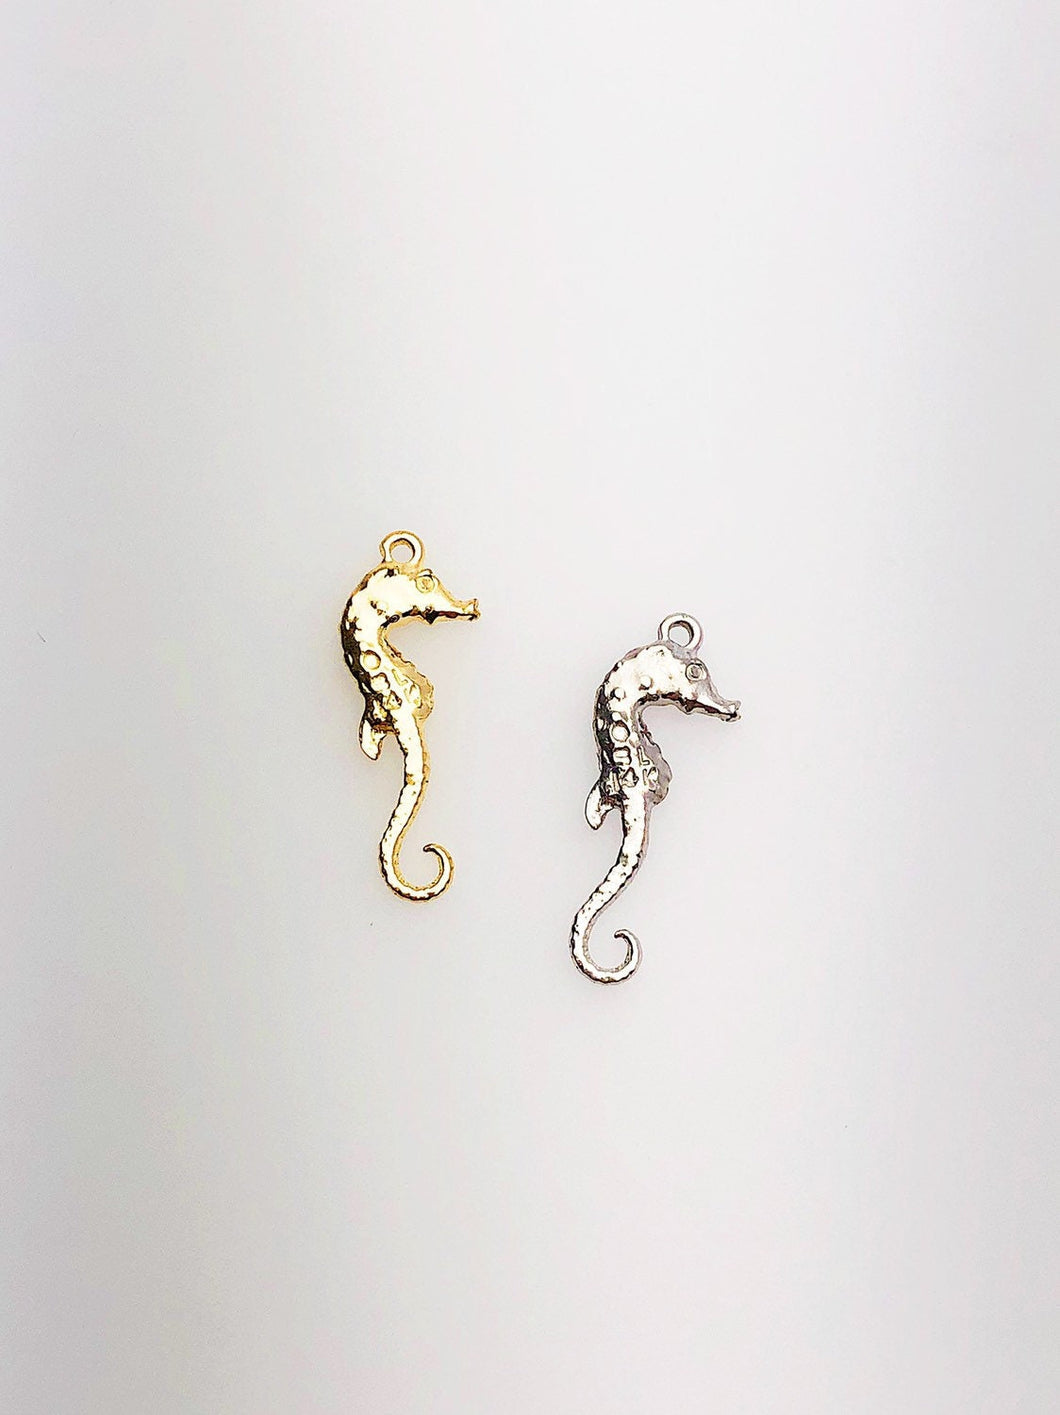 14K Solid Gold Seahorse Charm w/ Ring, 5.7x15.4mm, Made in USA (L-7)